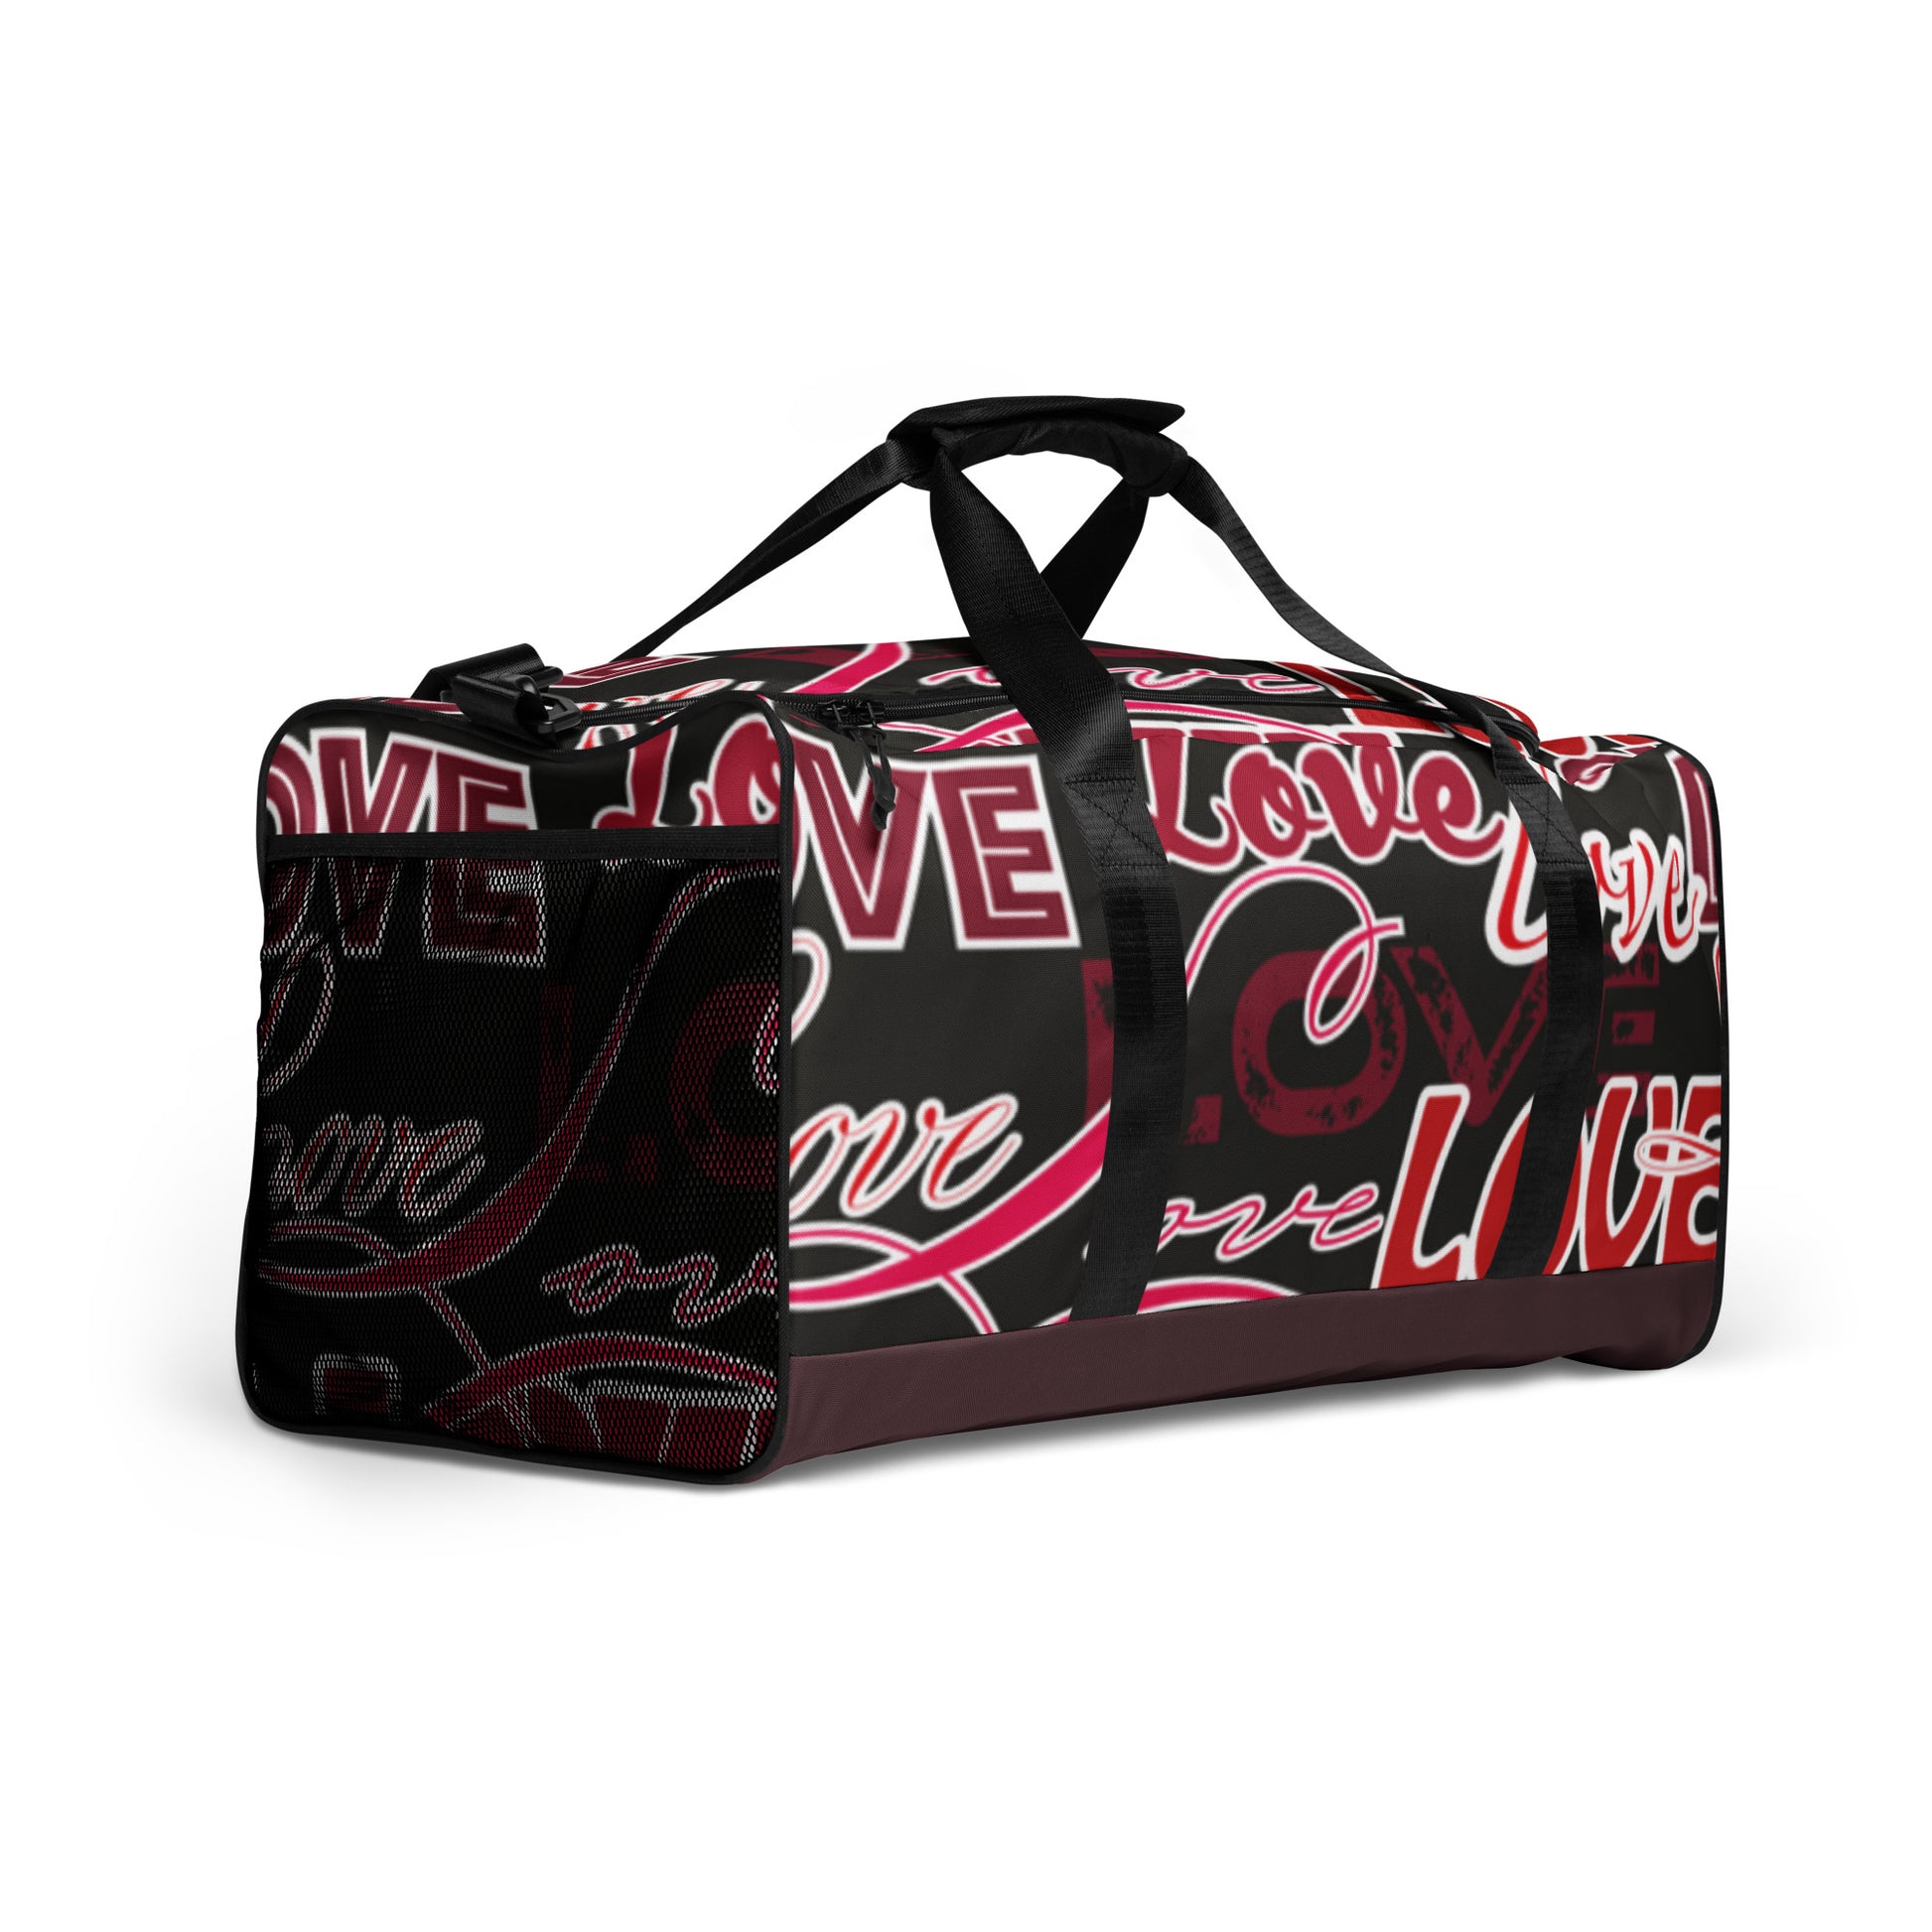 TIME OF VIBES - Travel Bag LOVE TWO - €109.00